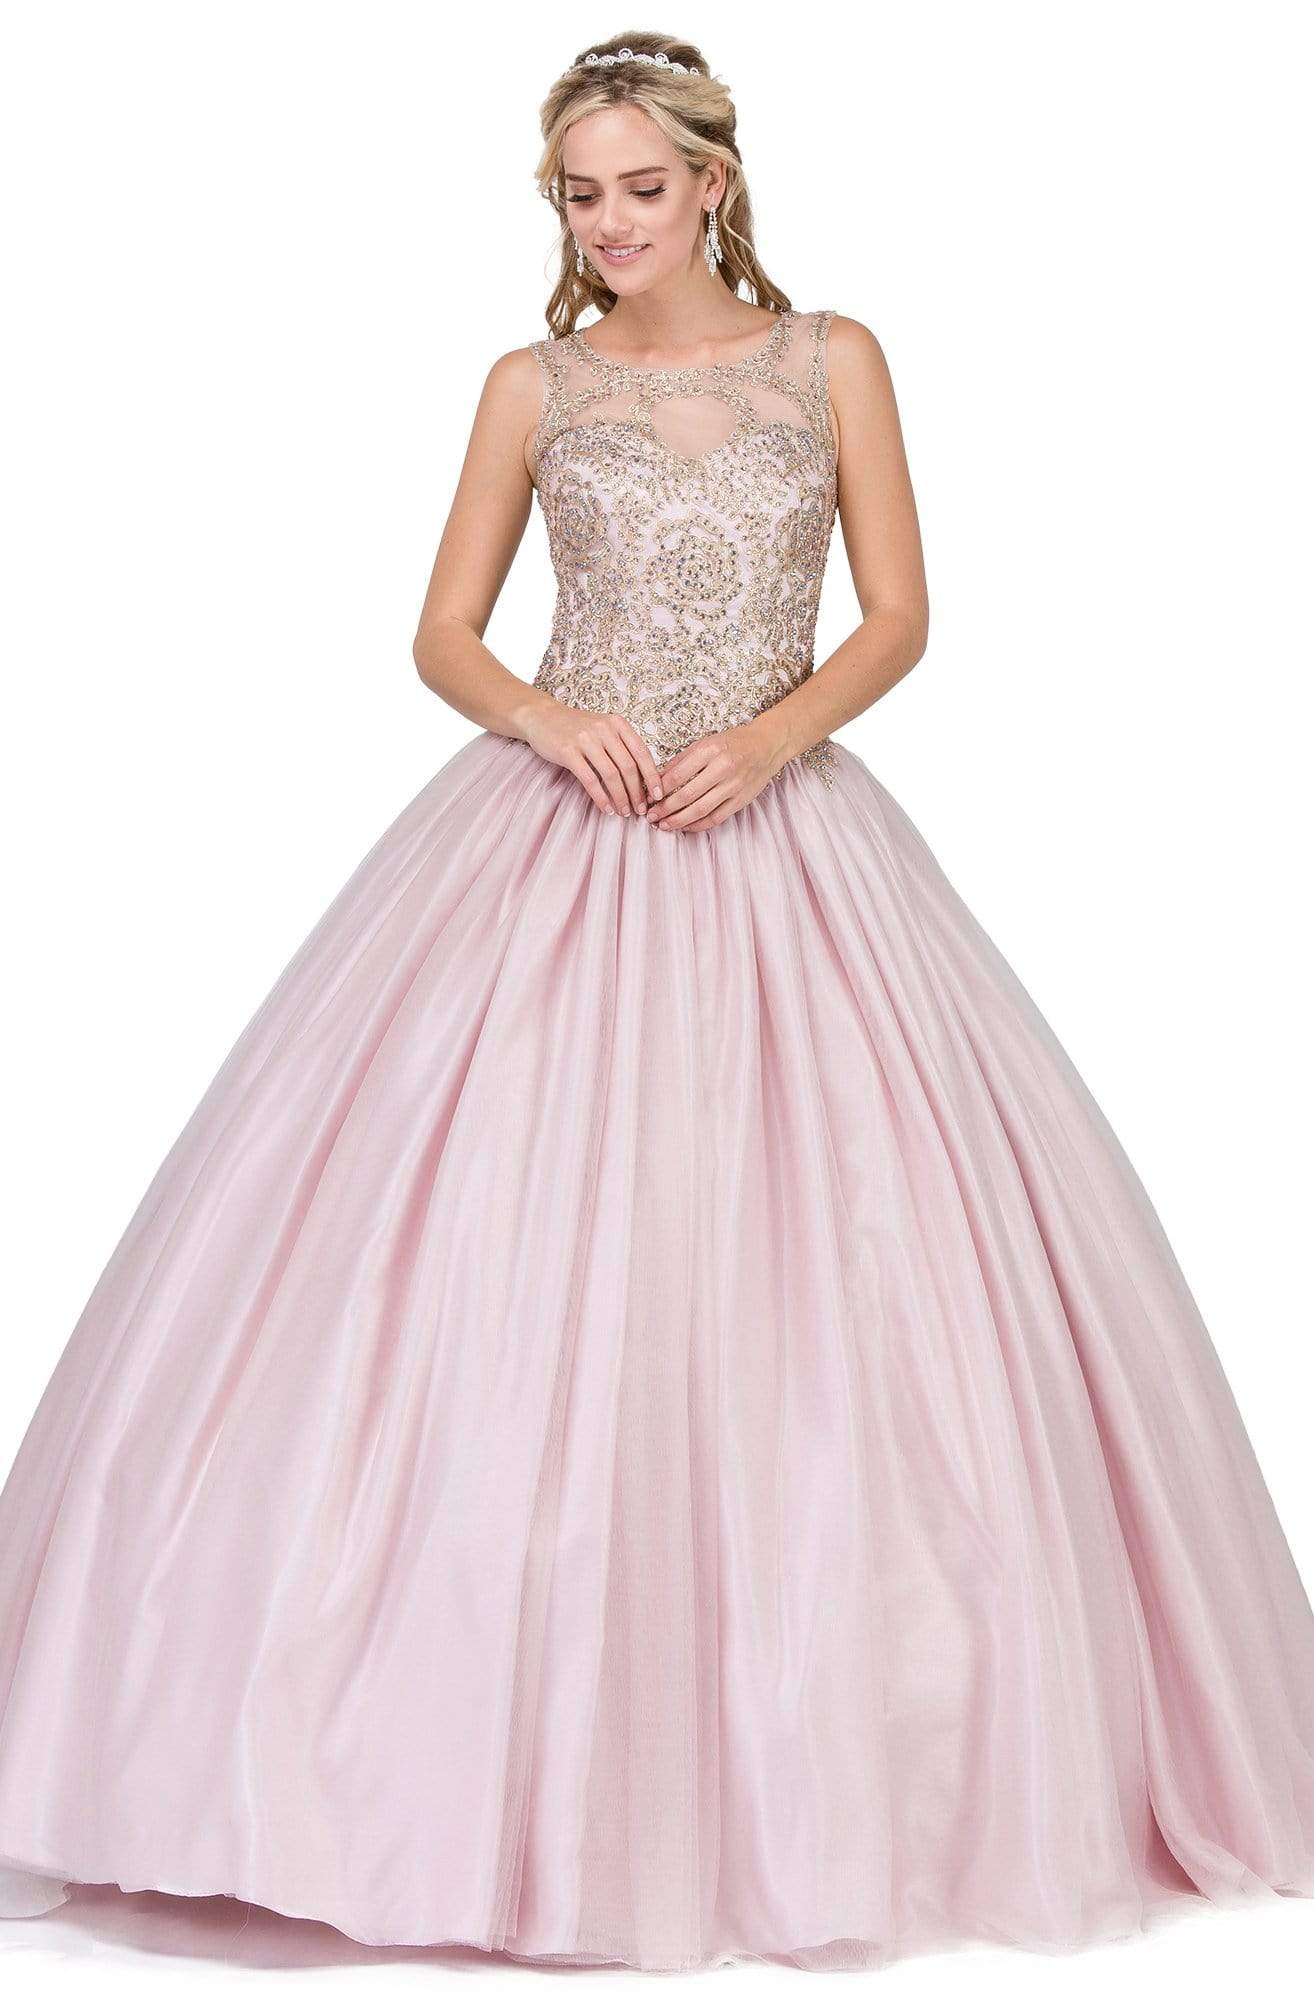 Dancing Queen - 1101 Gold Embroidered Illusion Neck Formal Ball Gown
